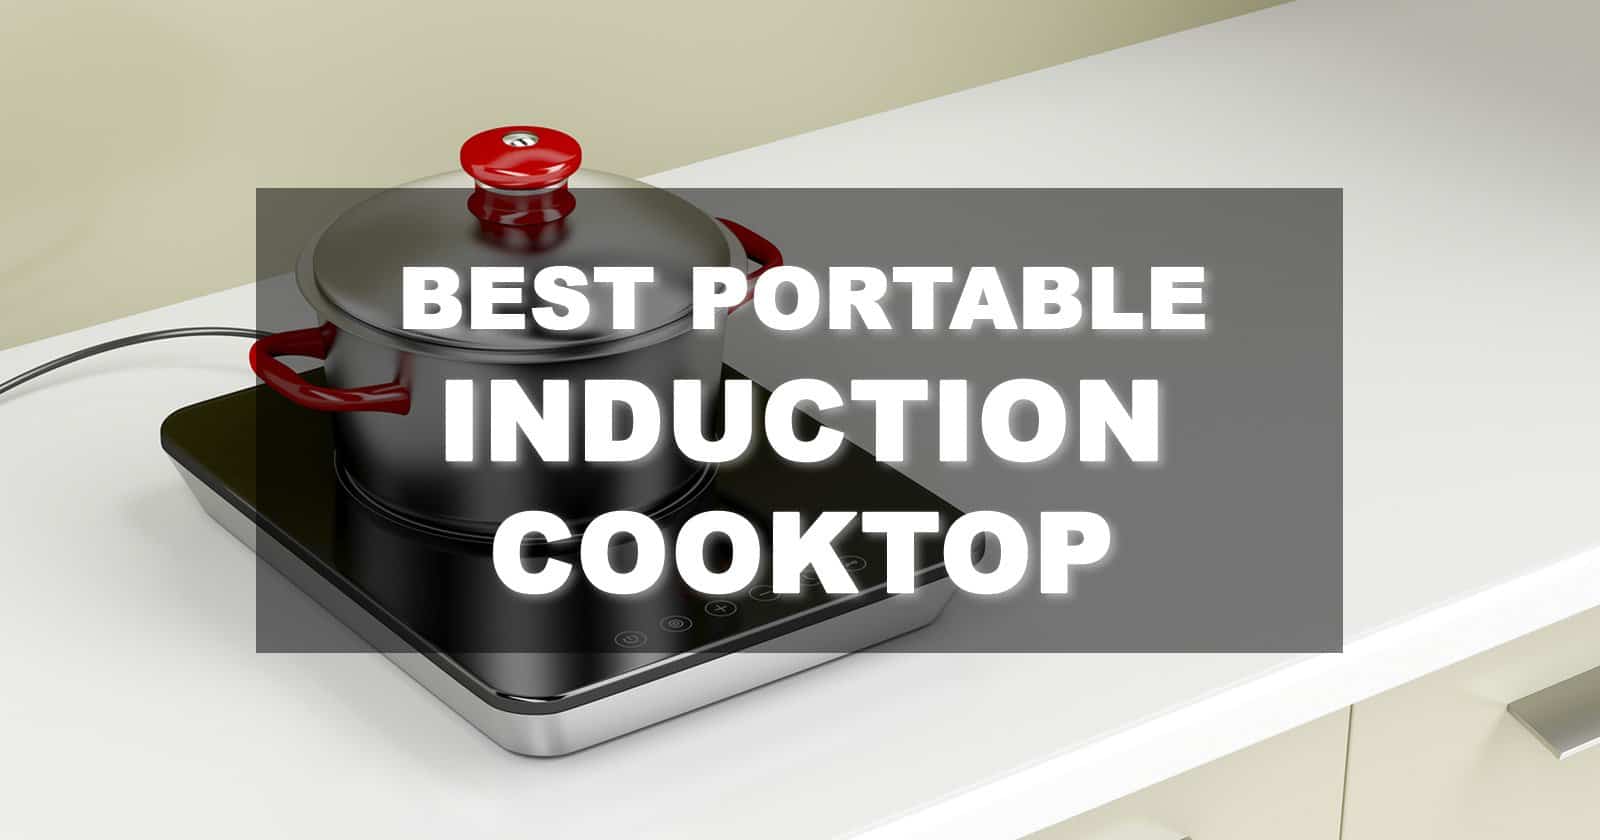 Best Portable Induction Cooktop